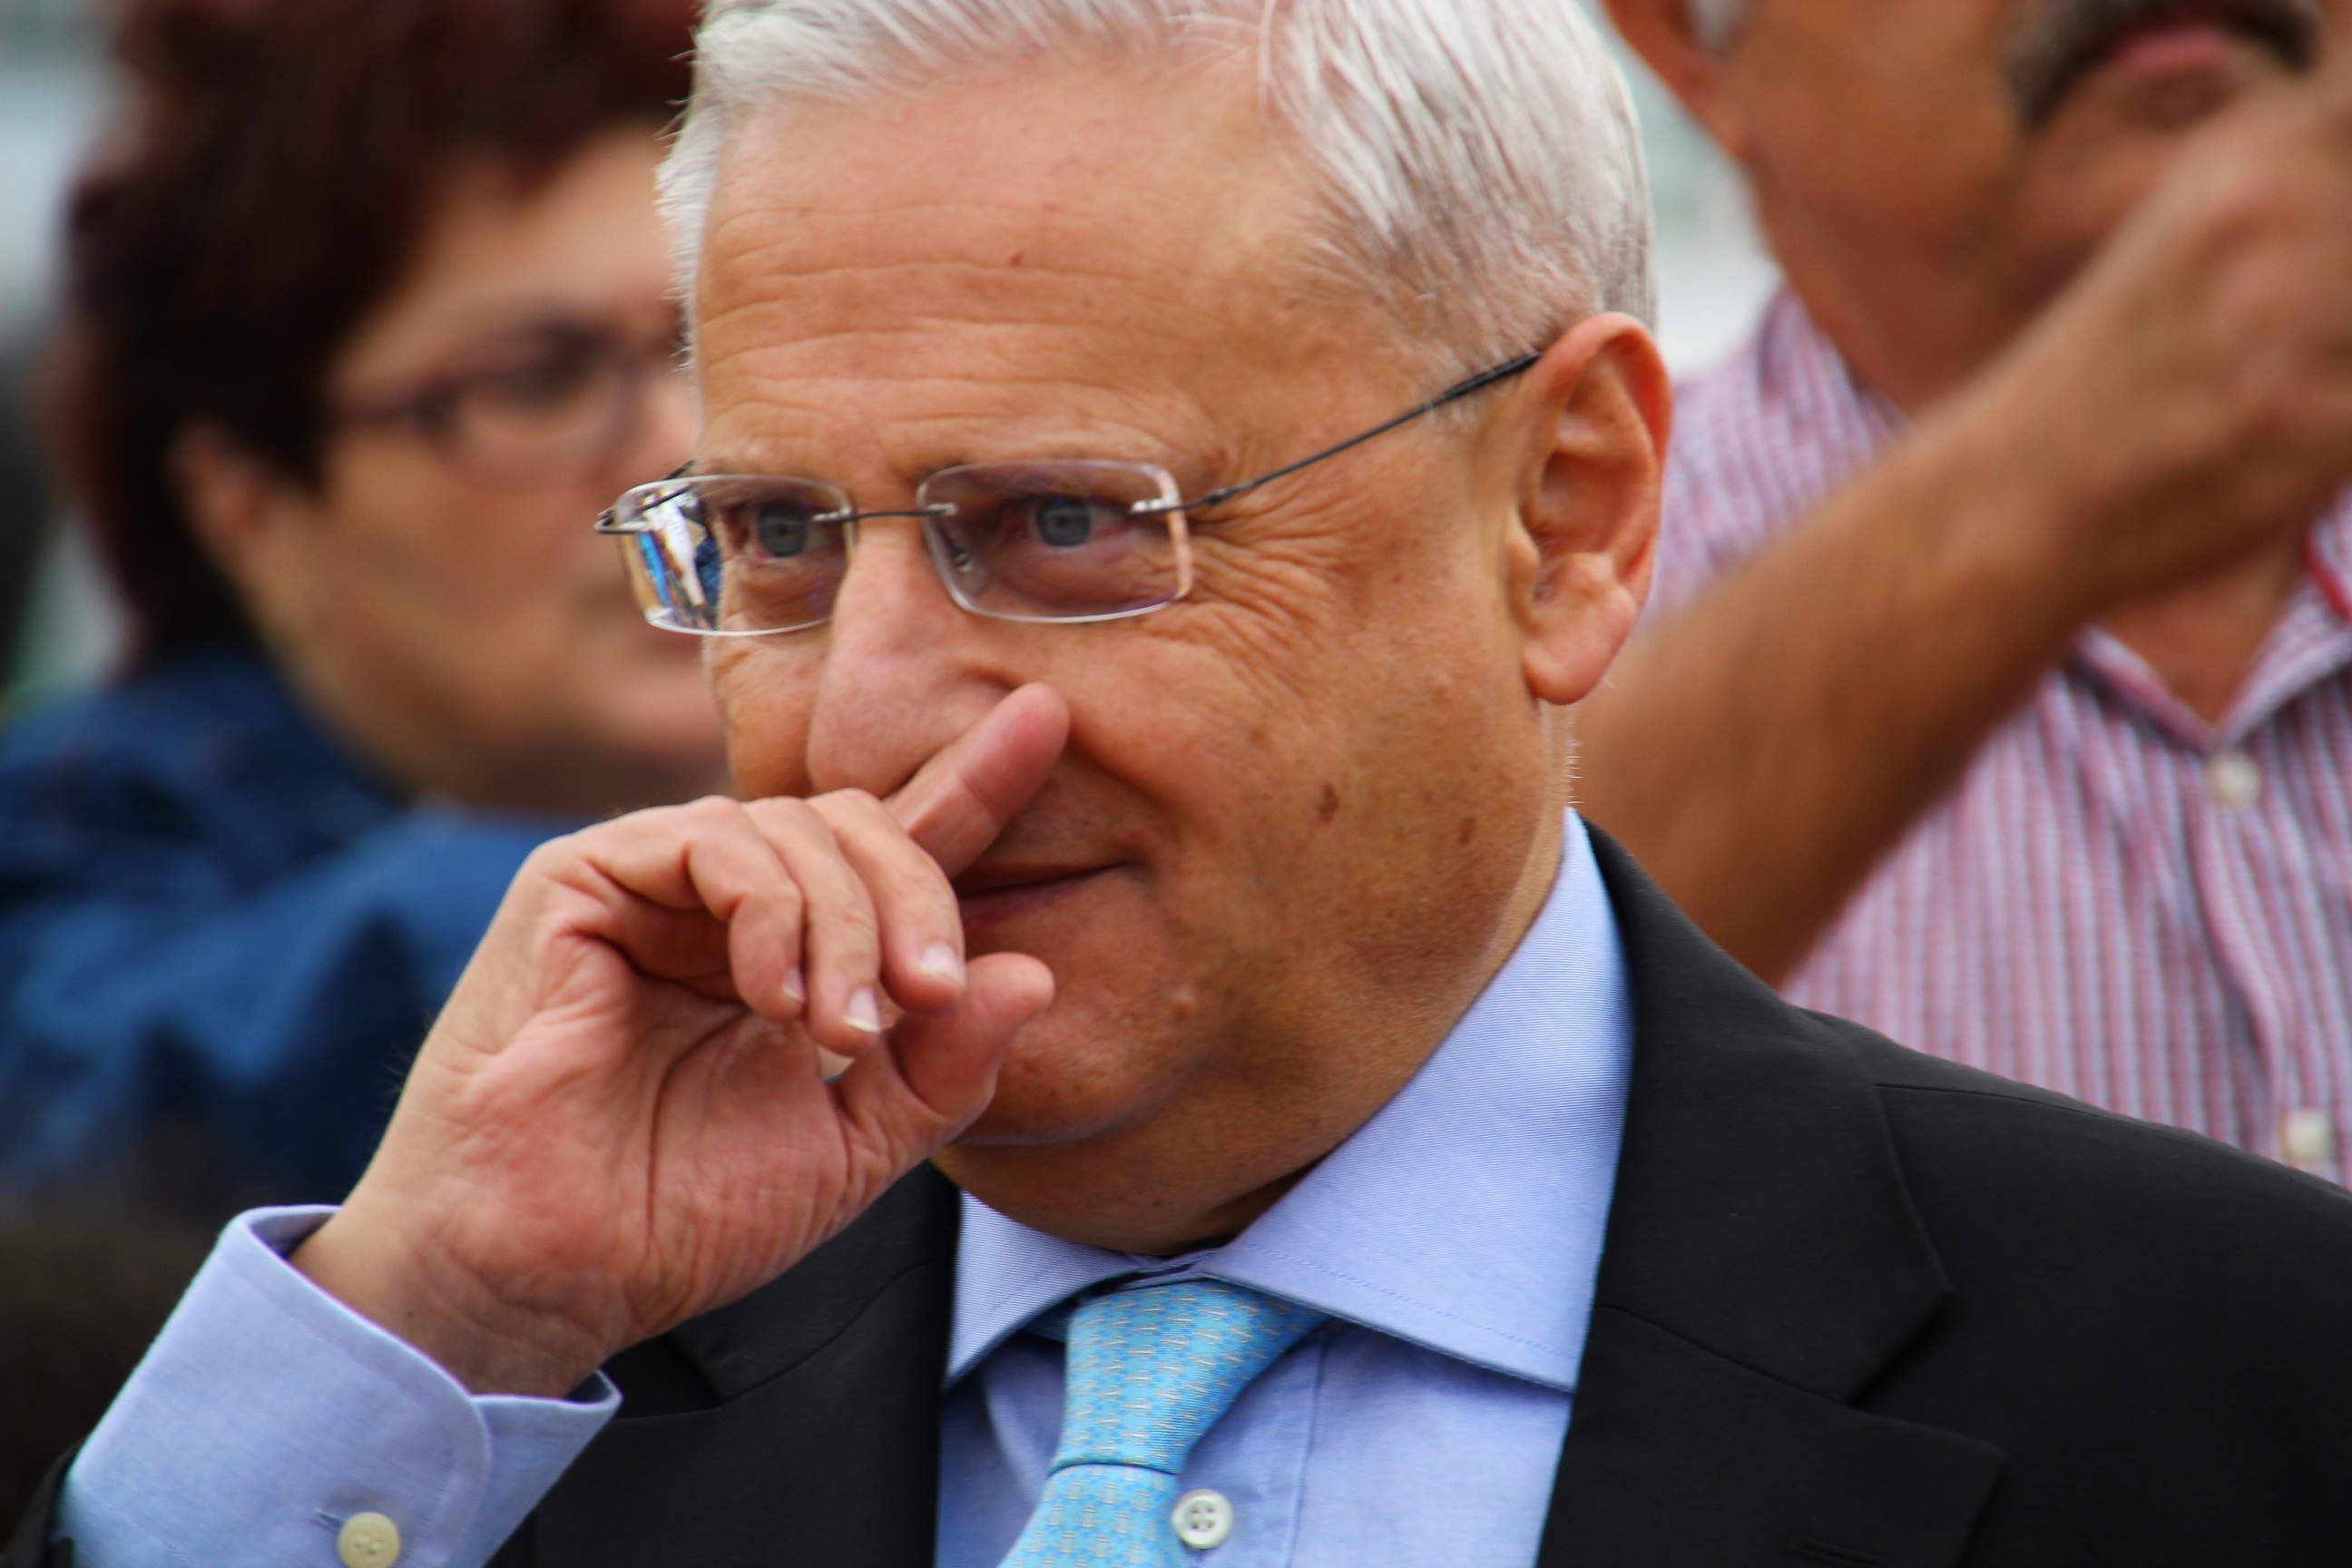 Forty years down the line, this fishy sleaze is still polluting Maltese politics and is now trying to ram down the door to a quarter-of-a-million-euros-a-year salary at the European Court of Auditors. It seems the only way to get rid of these foul Mintoffian politicians from Malta's dark ages is to run a stake through their heart and hope for the best.